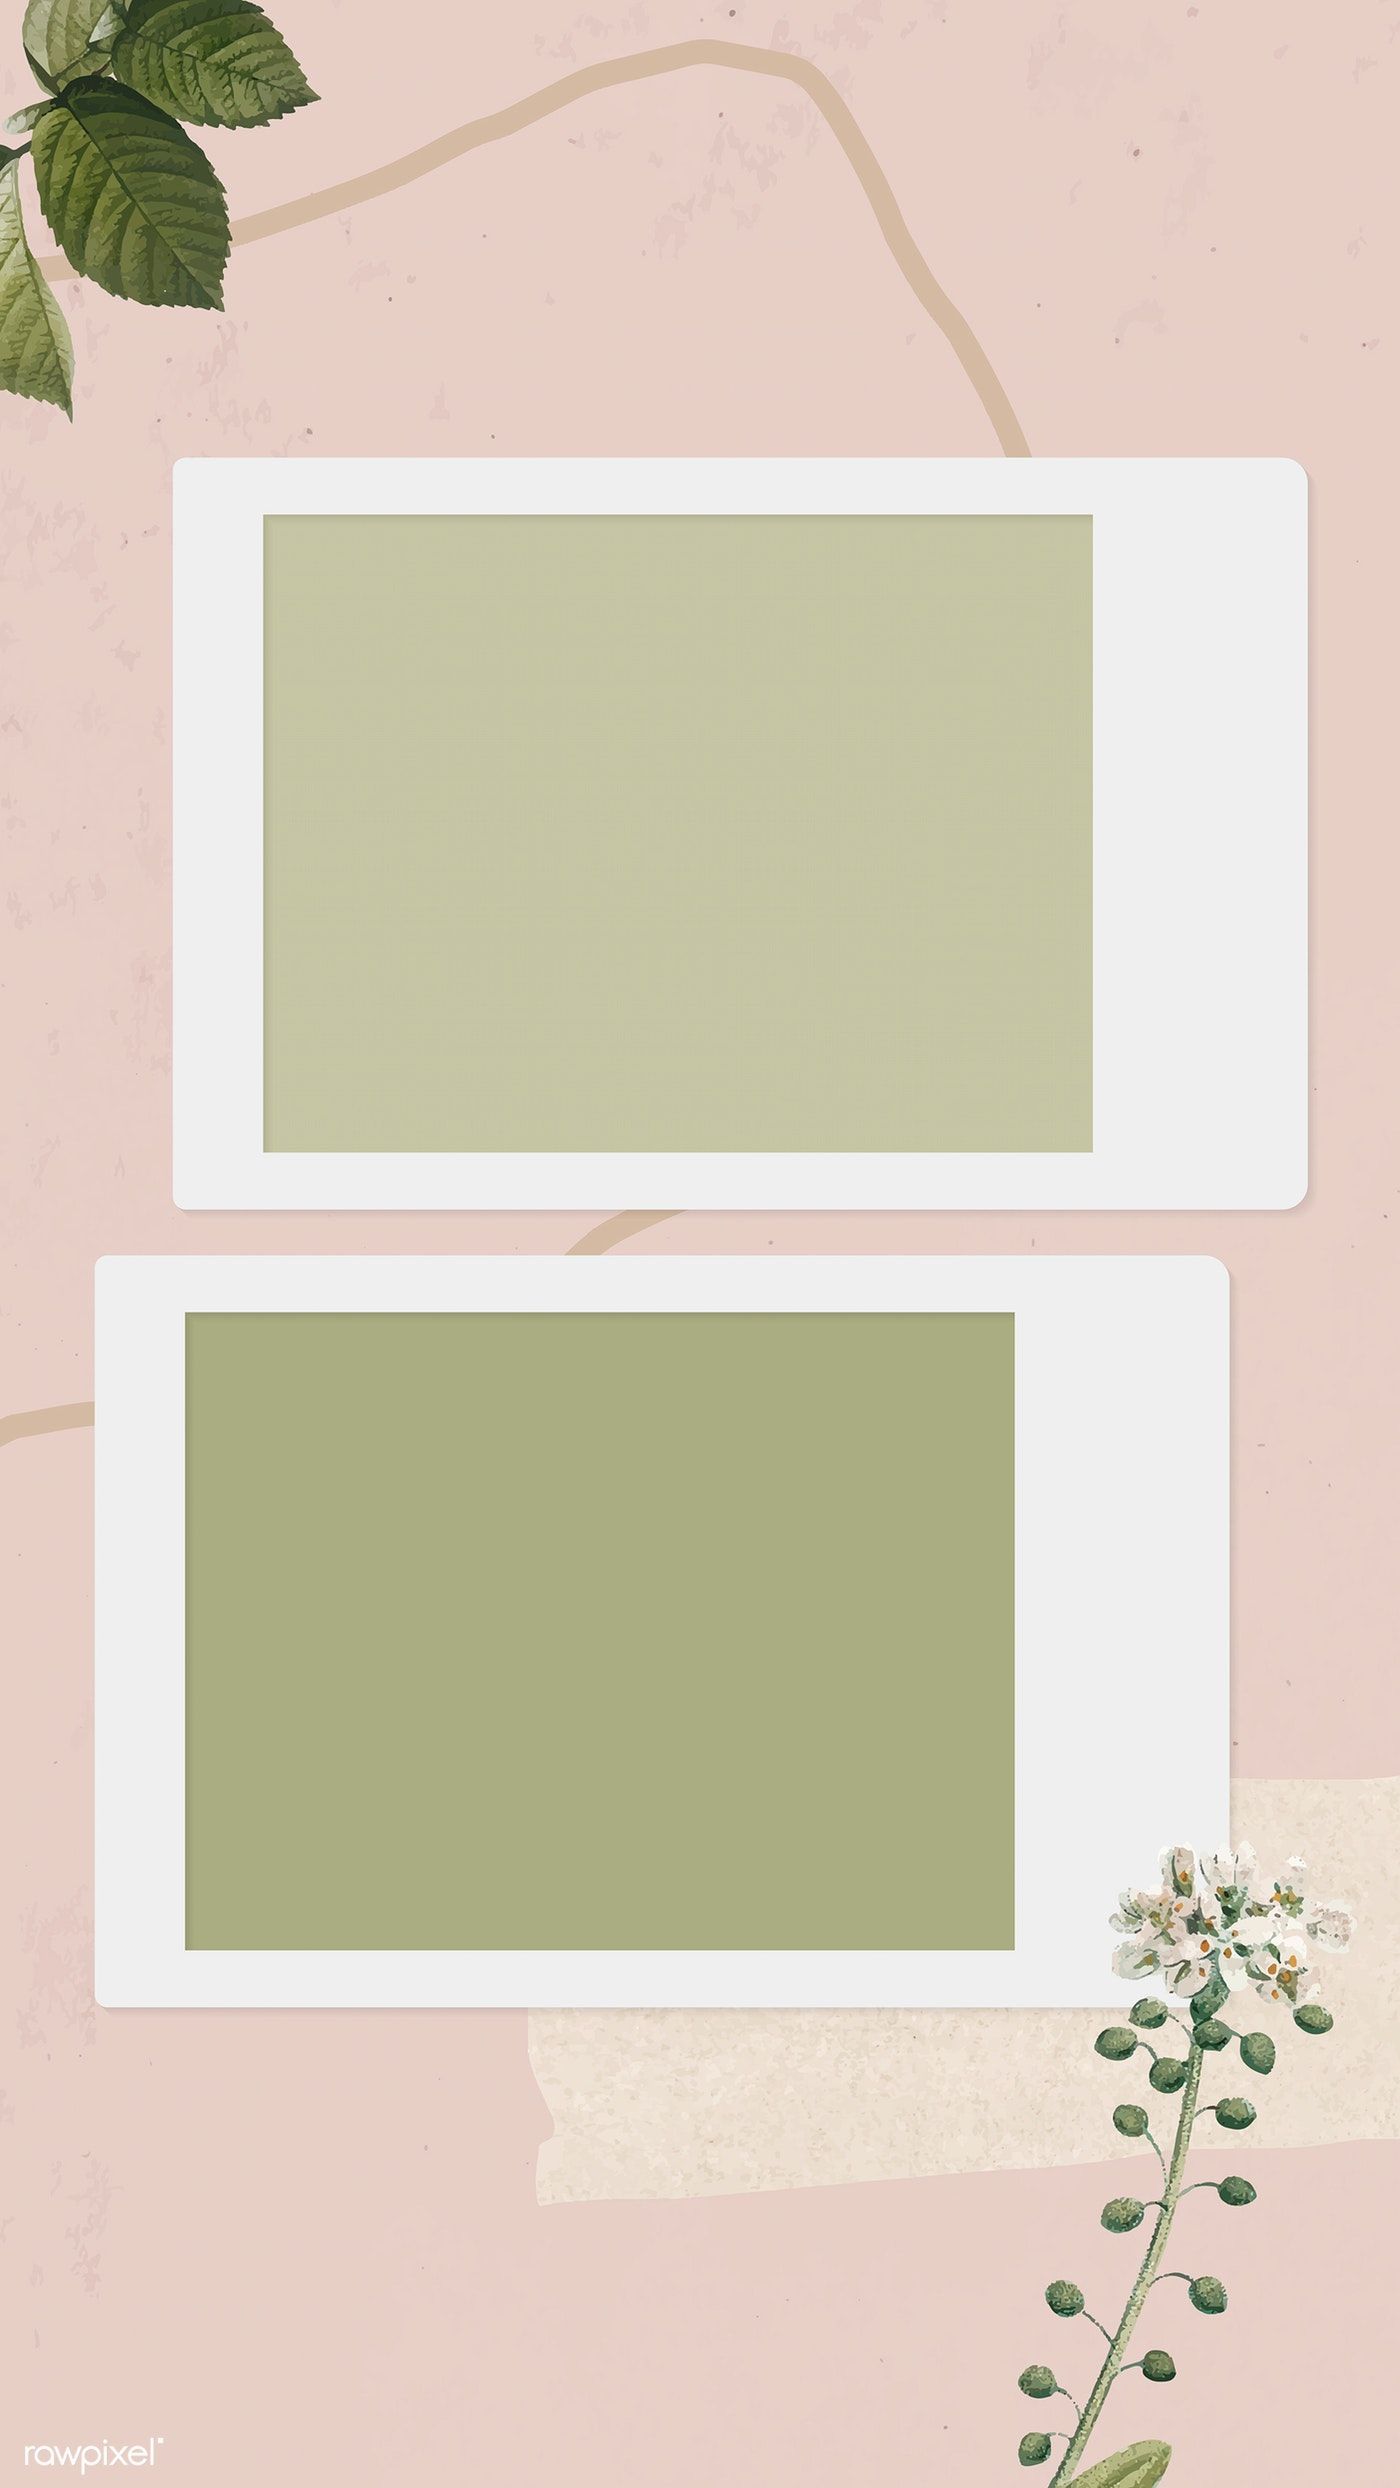 Download premium vector of Blank collage photo frame on pink